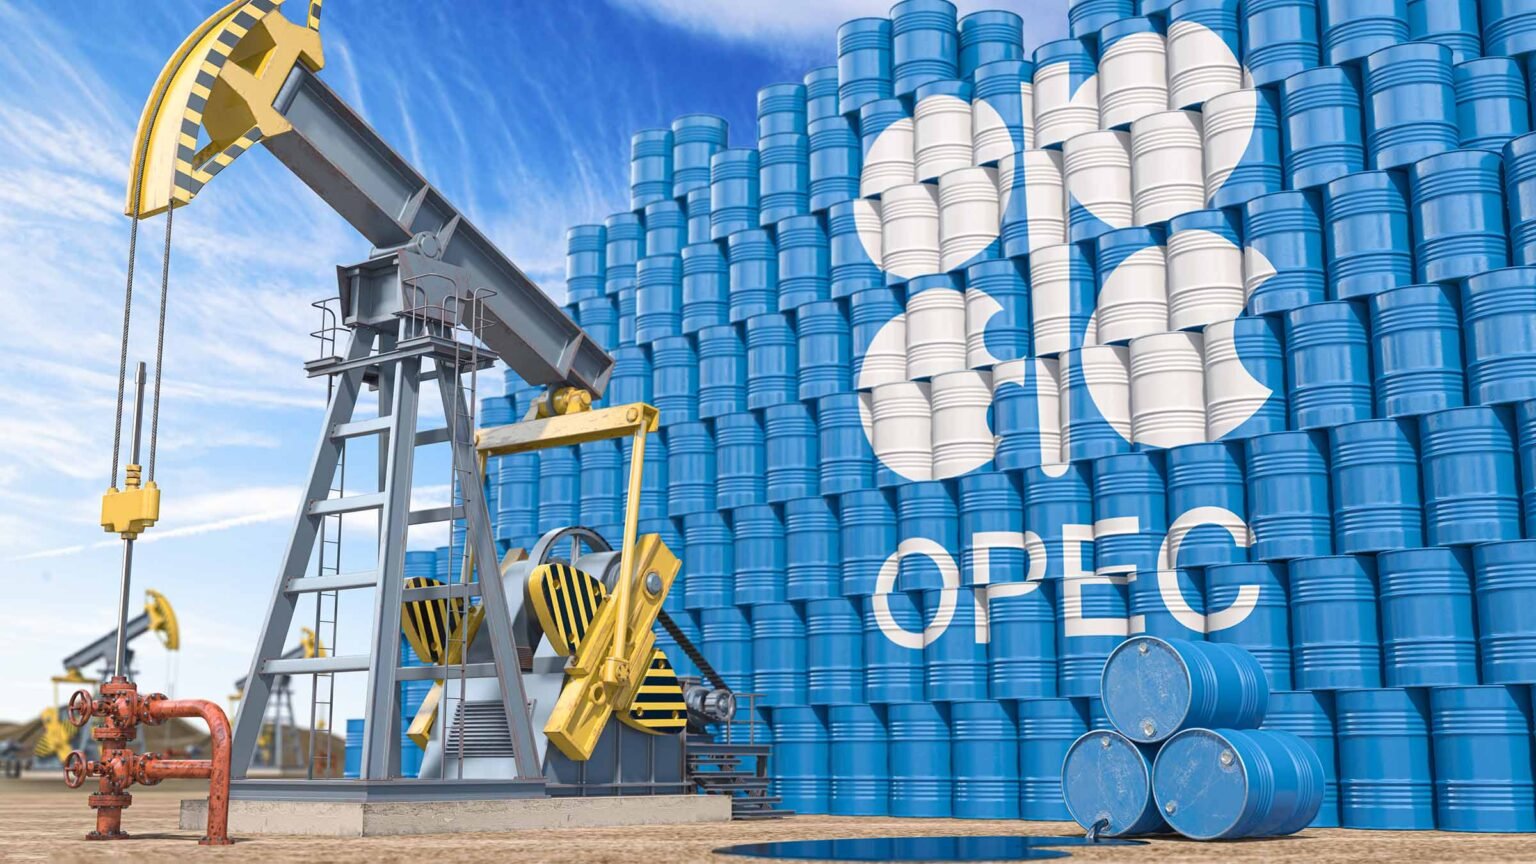 Nigeria's oil production dips to 1.23mbpd, per OPEC reports.